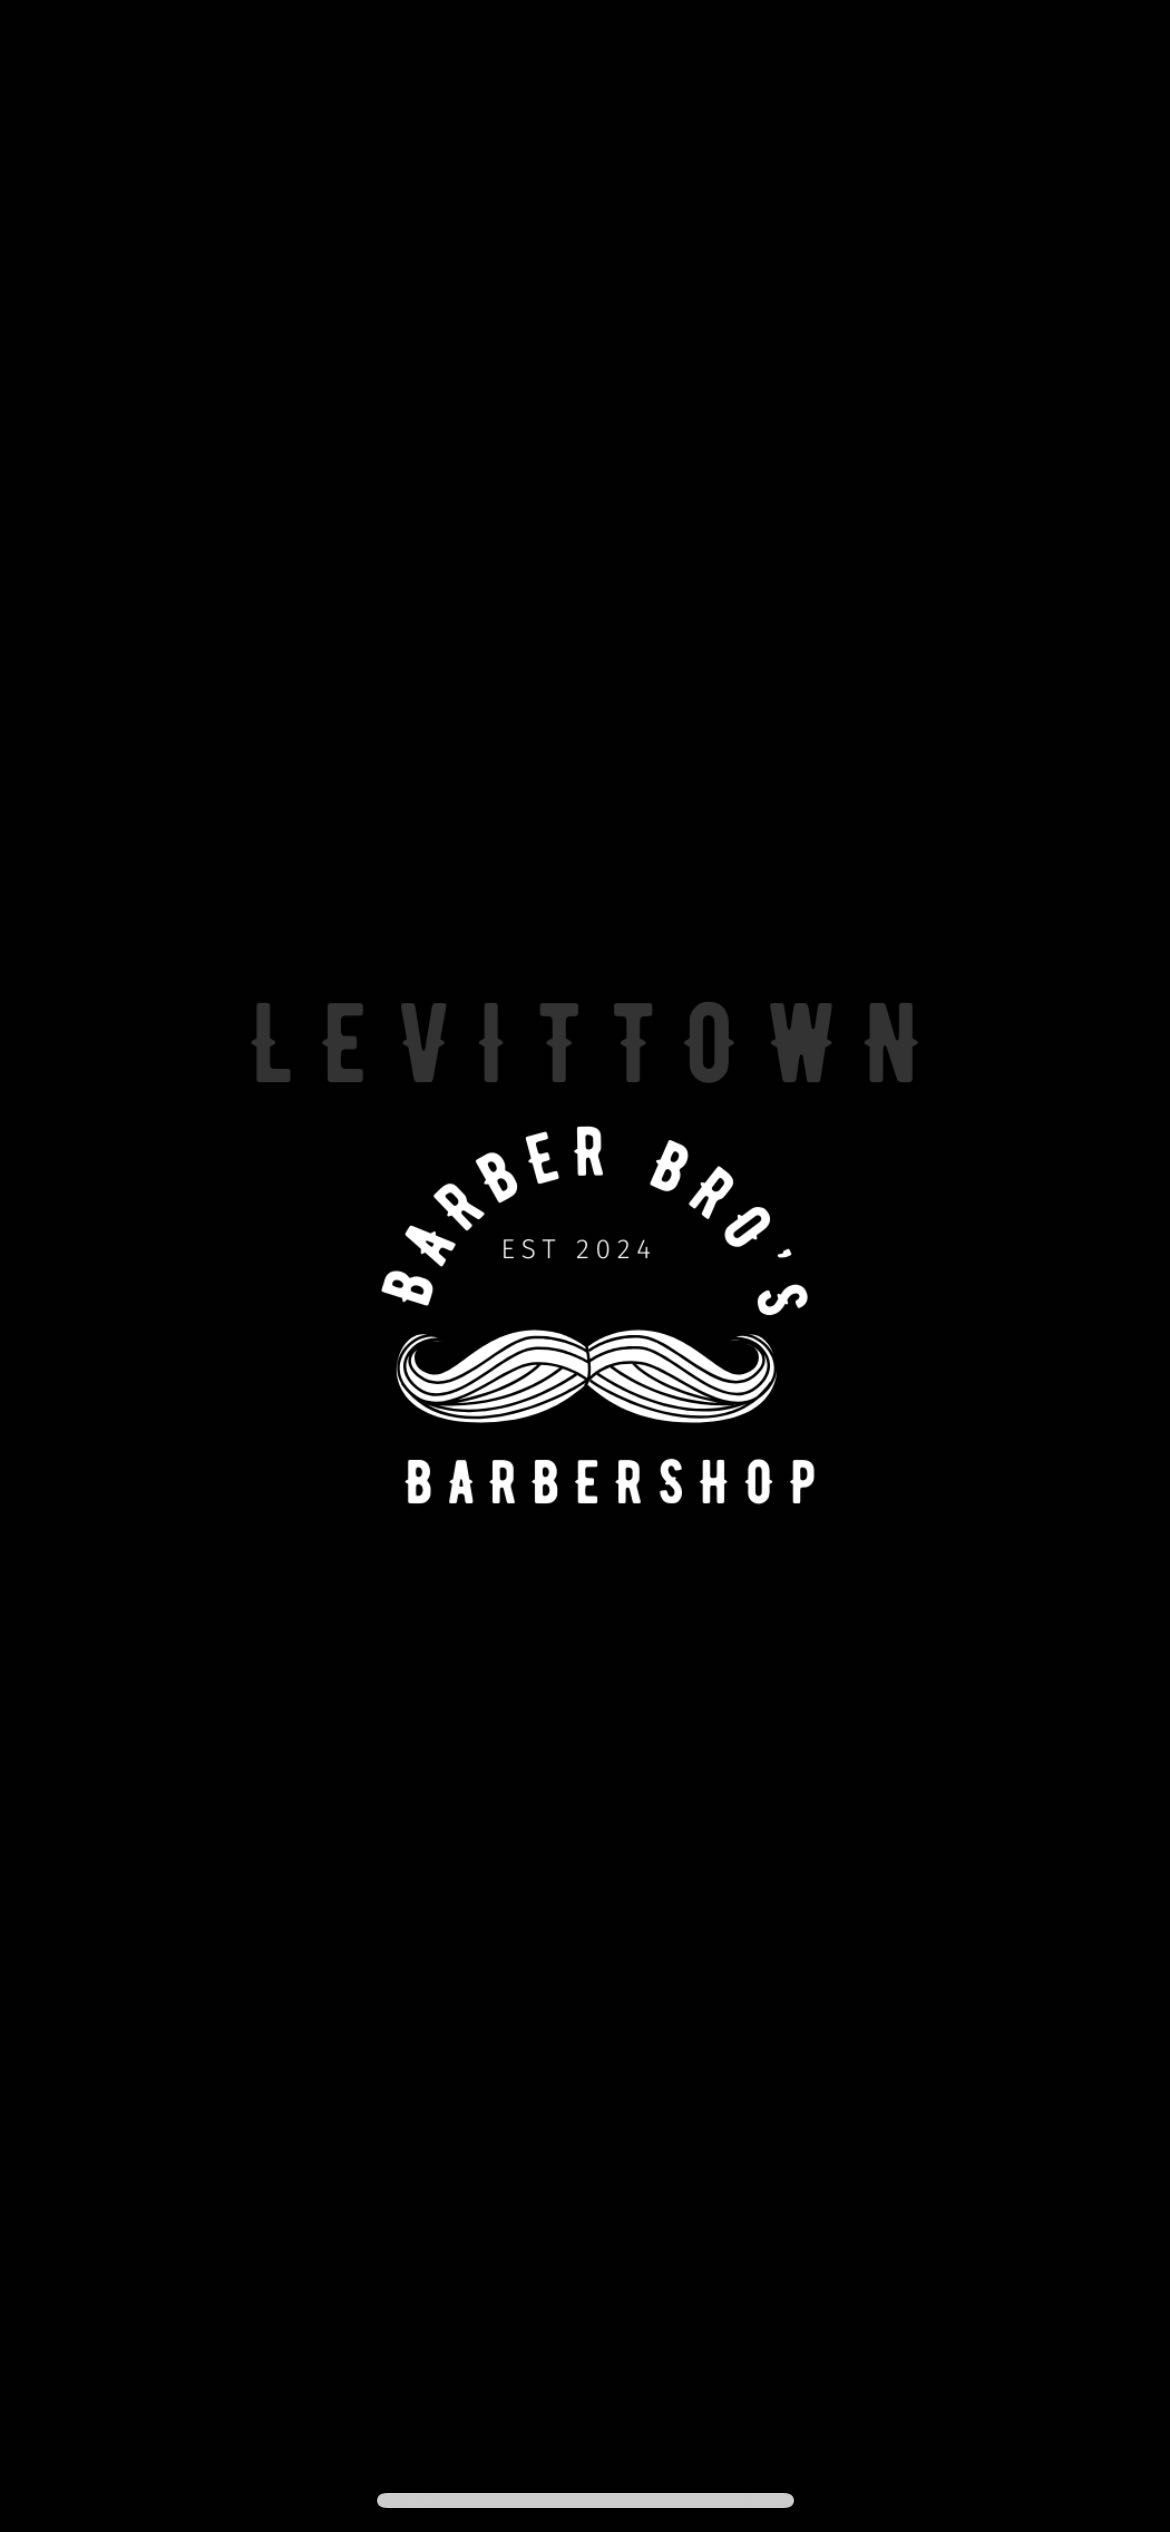 Mikey Ay Levittown Barber Bros, 3259 Hempstead Turnpike Levittown Ny 11756, B, Levittown, 11756